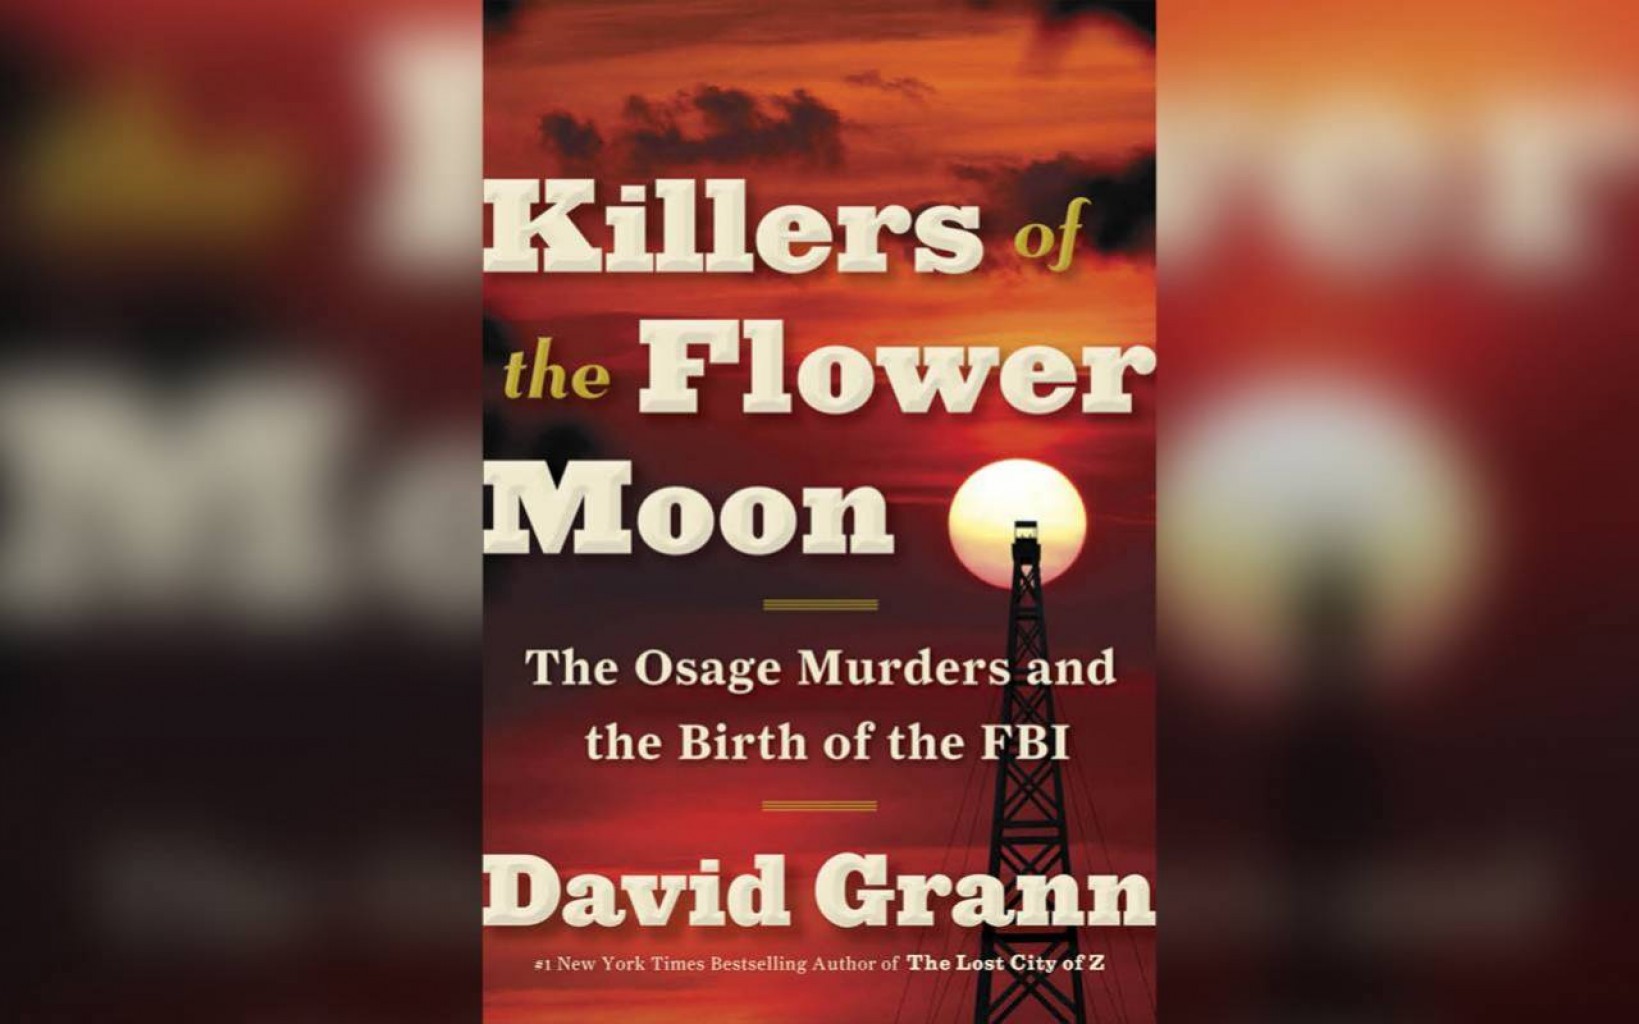 “Killers of the Flower Moon”